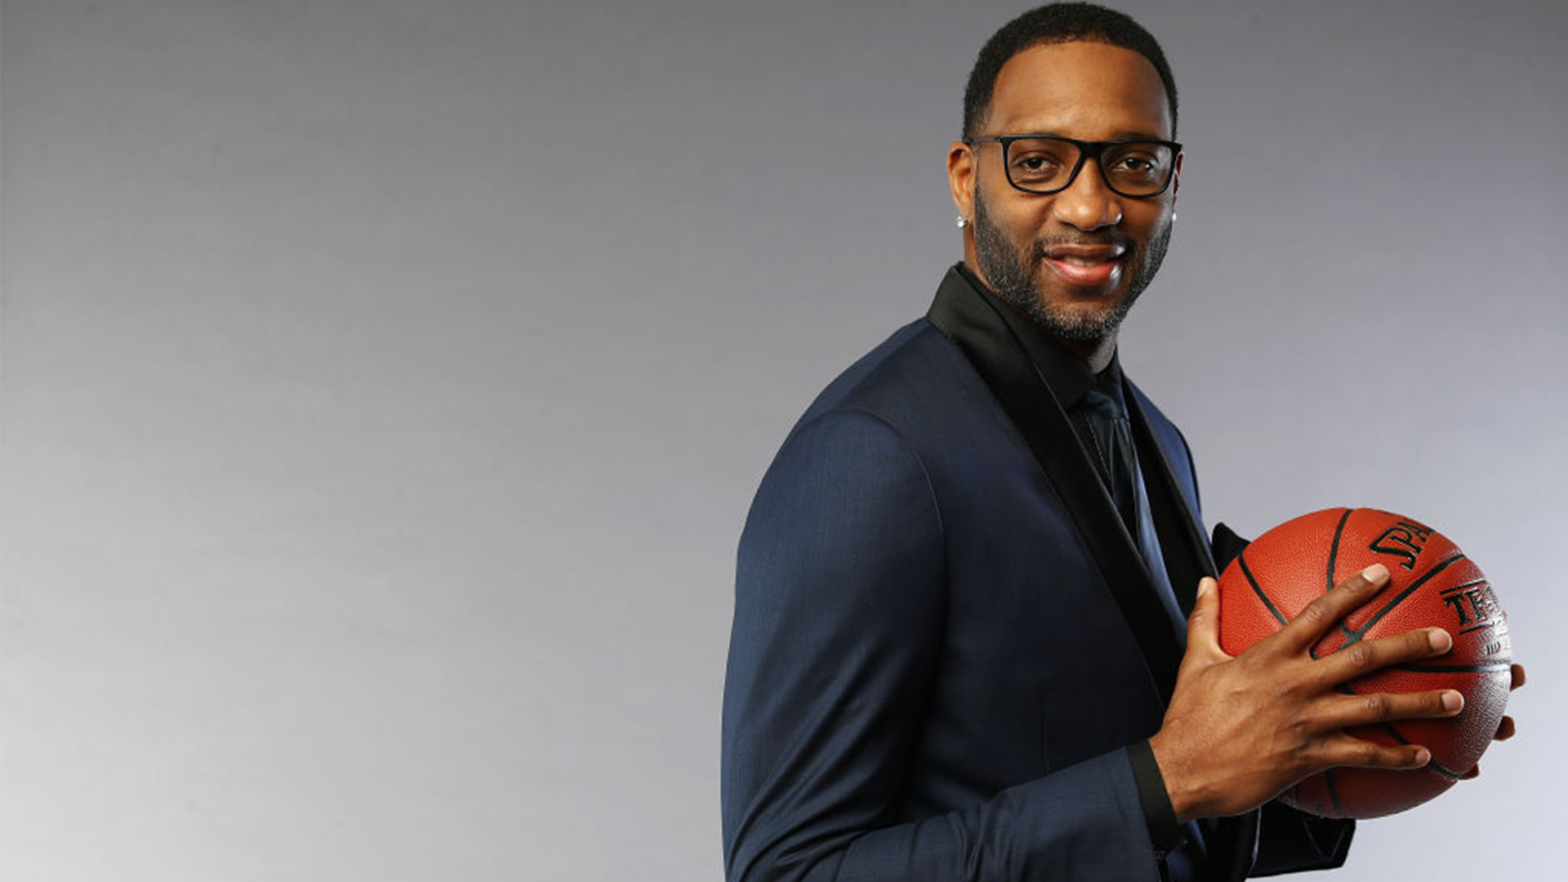 Tracy McGrady Backs His Startup With $10M After Always Investing In Others' Ideas But Says Not Once Did He 'Ever Trust' His